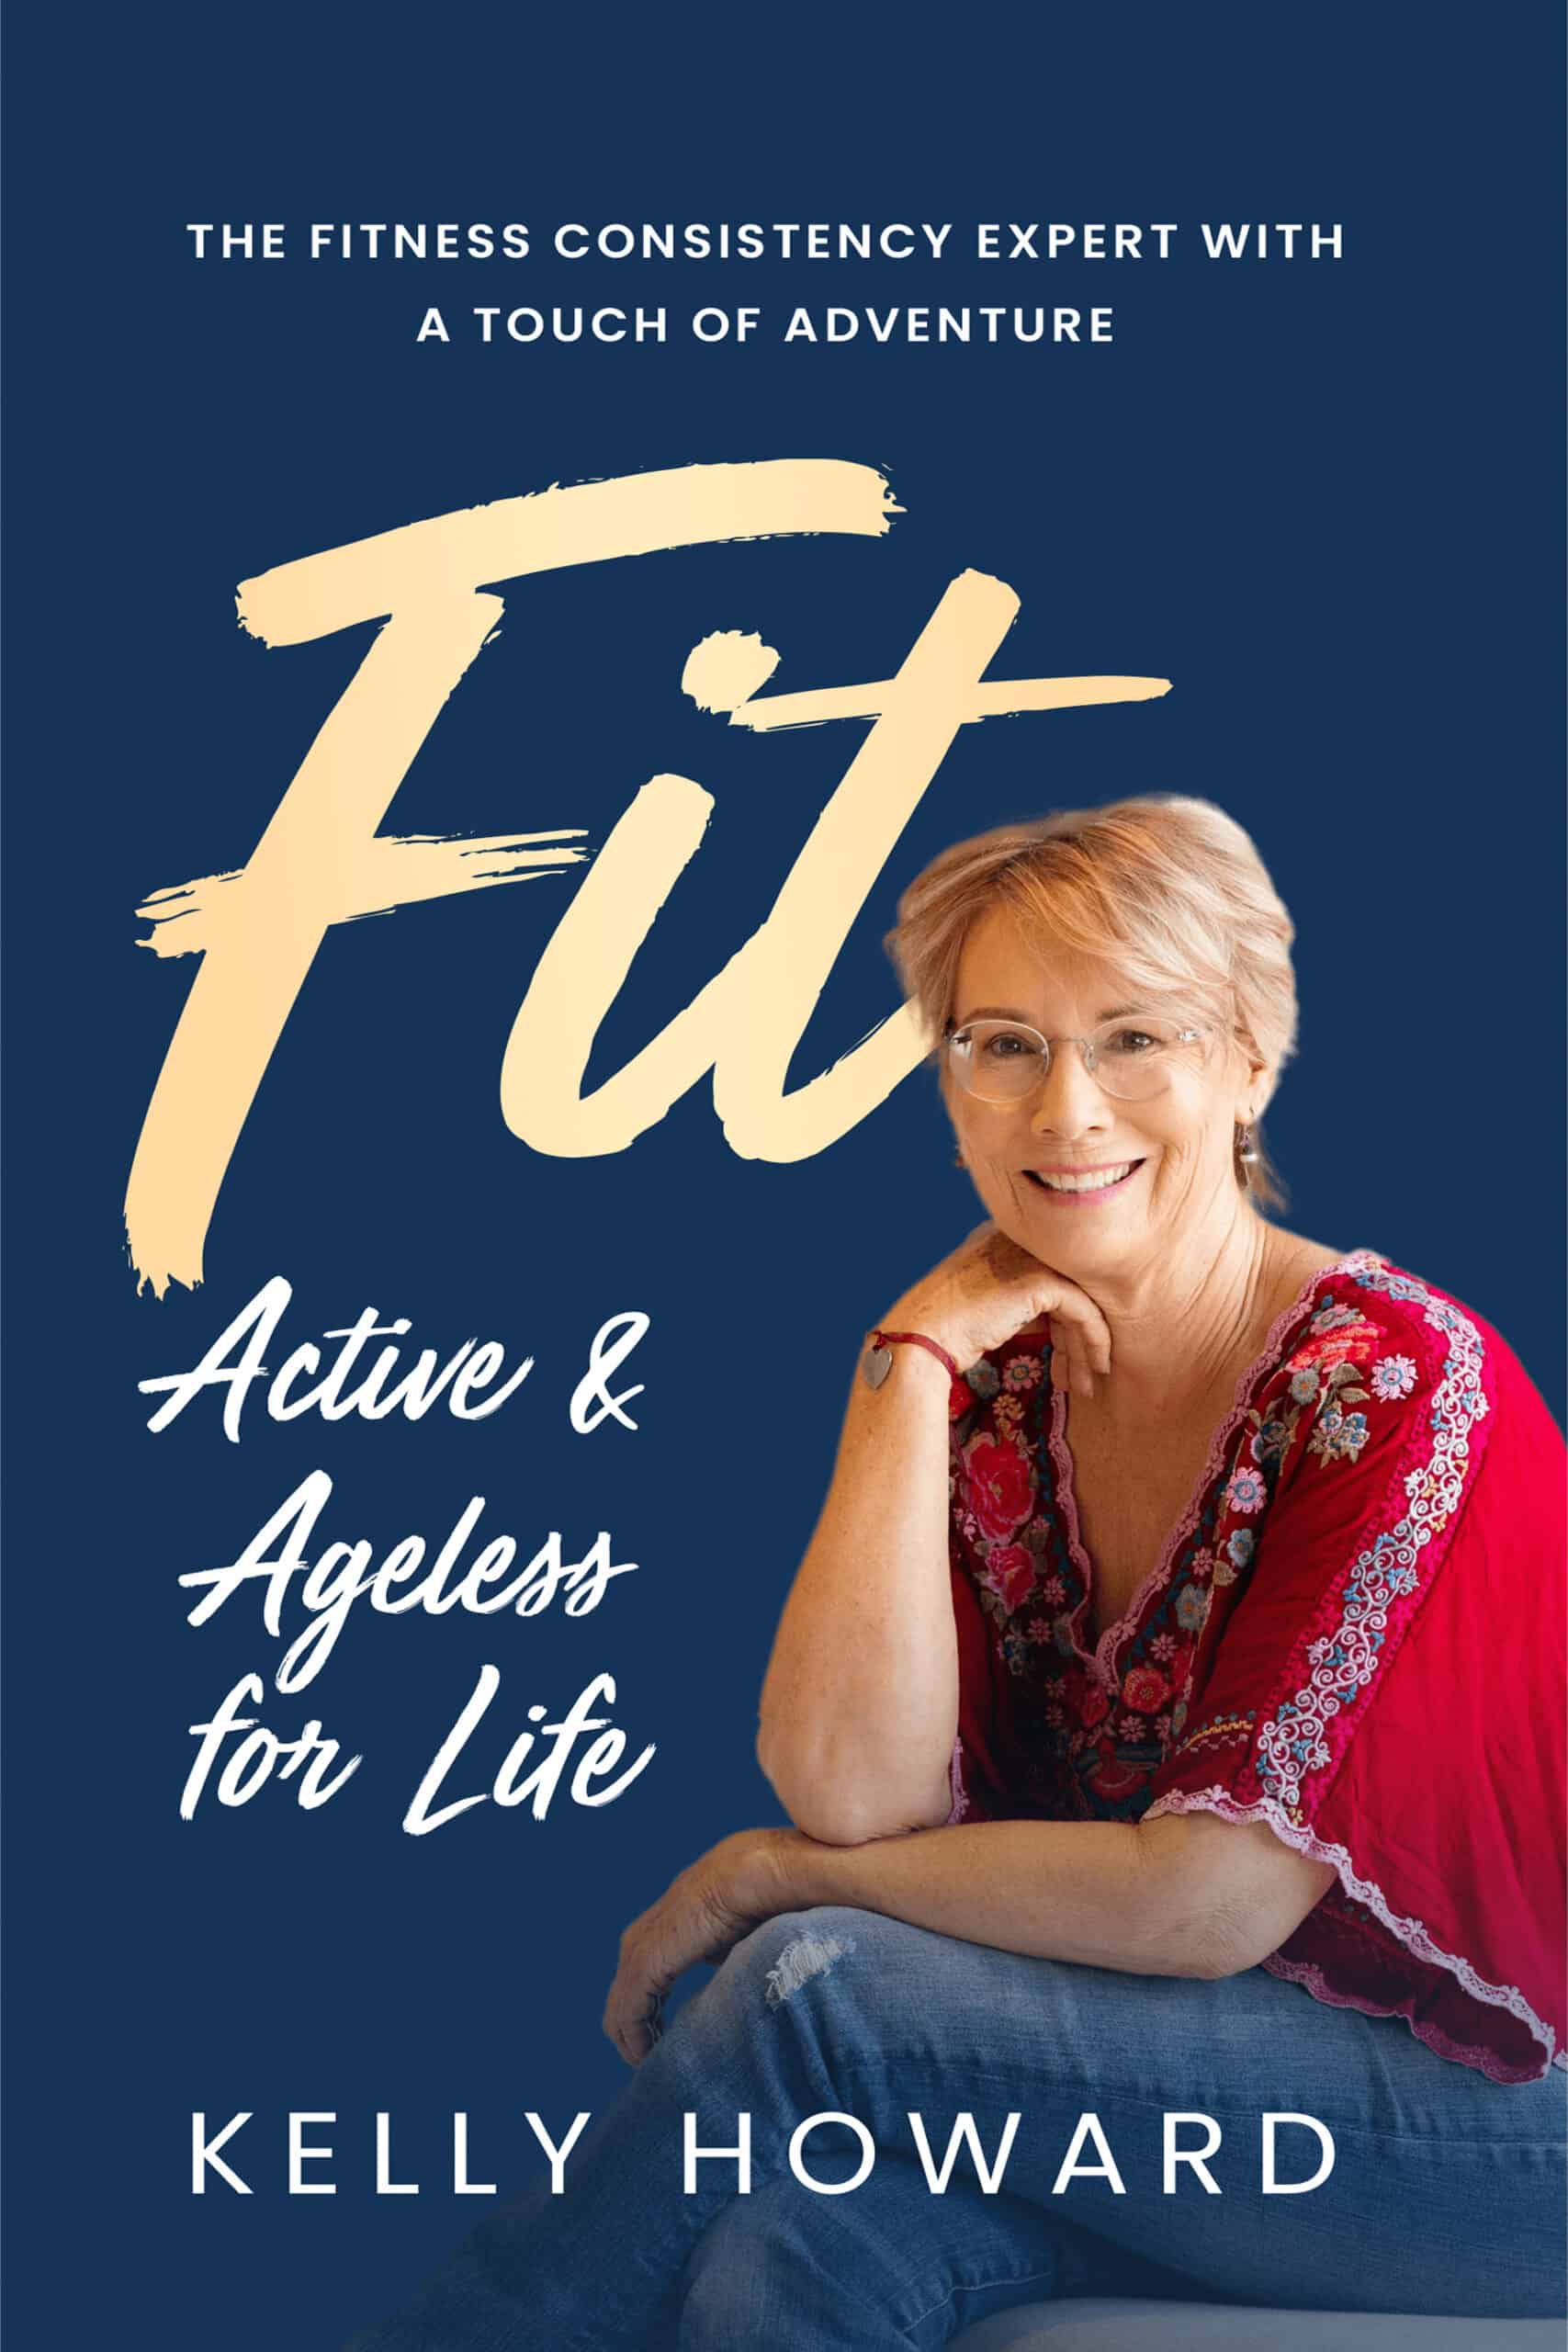 Cover of the book "Fit is Freedom: Active & Ageless for Life" by Kelly Howard, featuring a smiling woman with a background that blends into the title design.